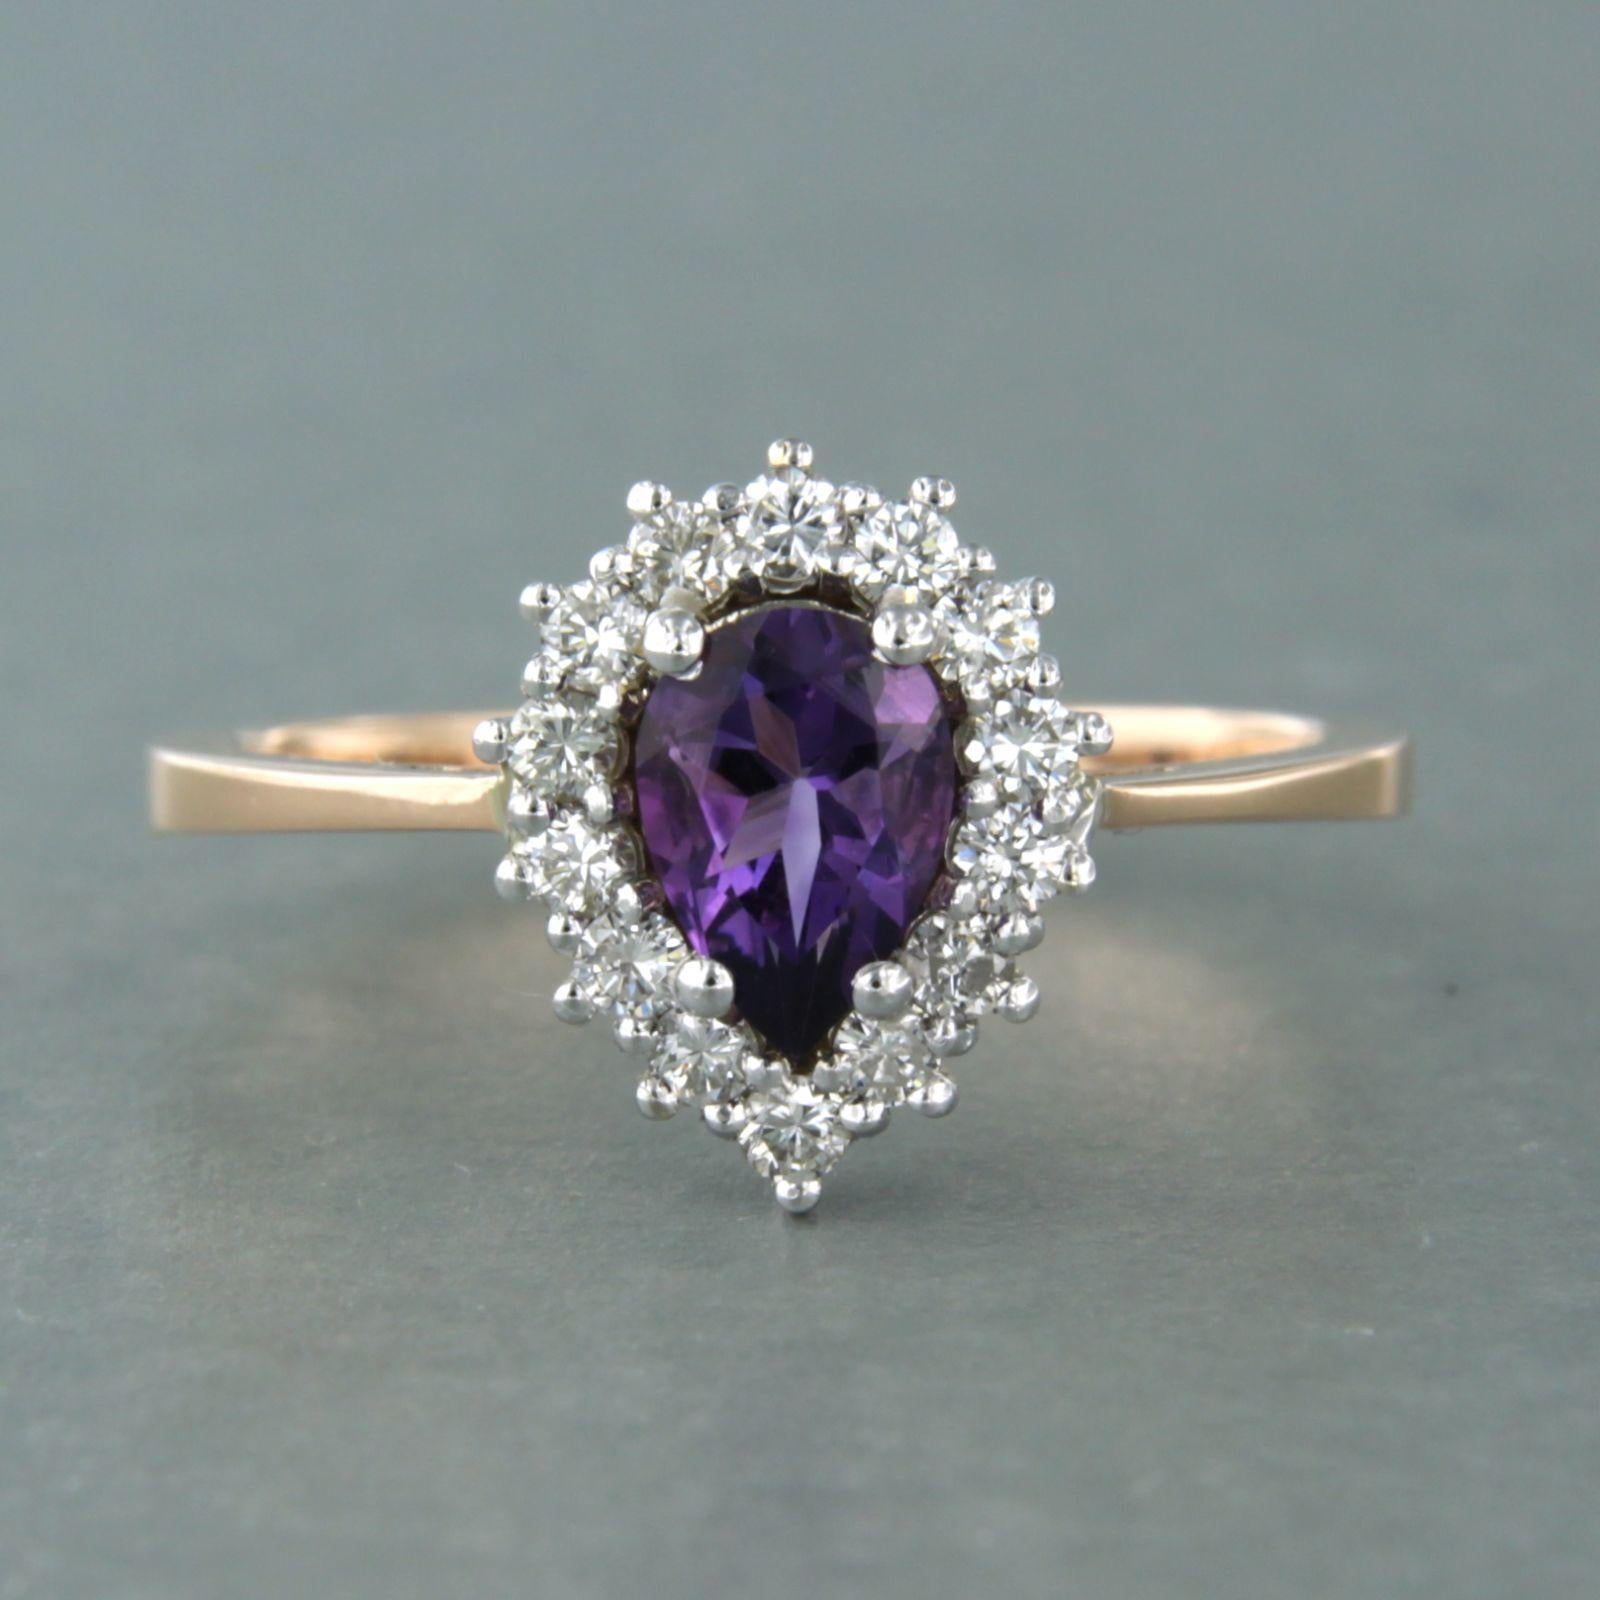 18k bicolour gold entourage ring set with central amethyst. 0.65ct and an entourage of brilliant cut diamonds up to. 0.32ct - F/G - VS/SI - ring size 7.25 US - 17.5 (55) EU

Detailed description:

The top of the ring is 1.2 cm wide

weight: 3.3